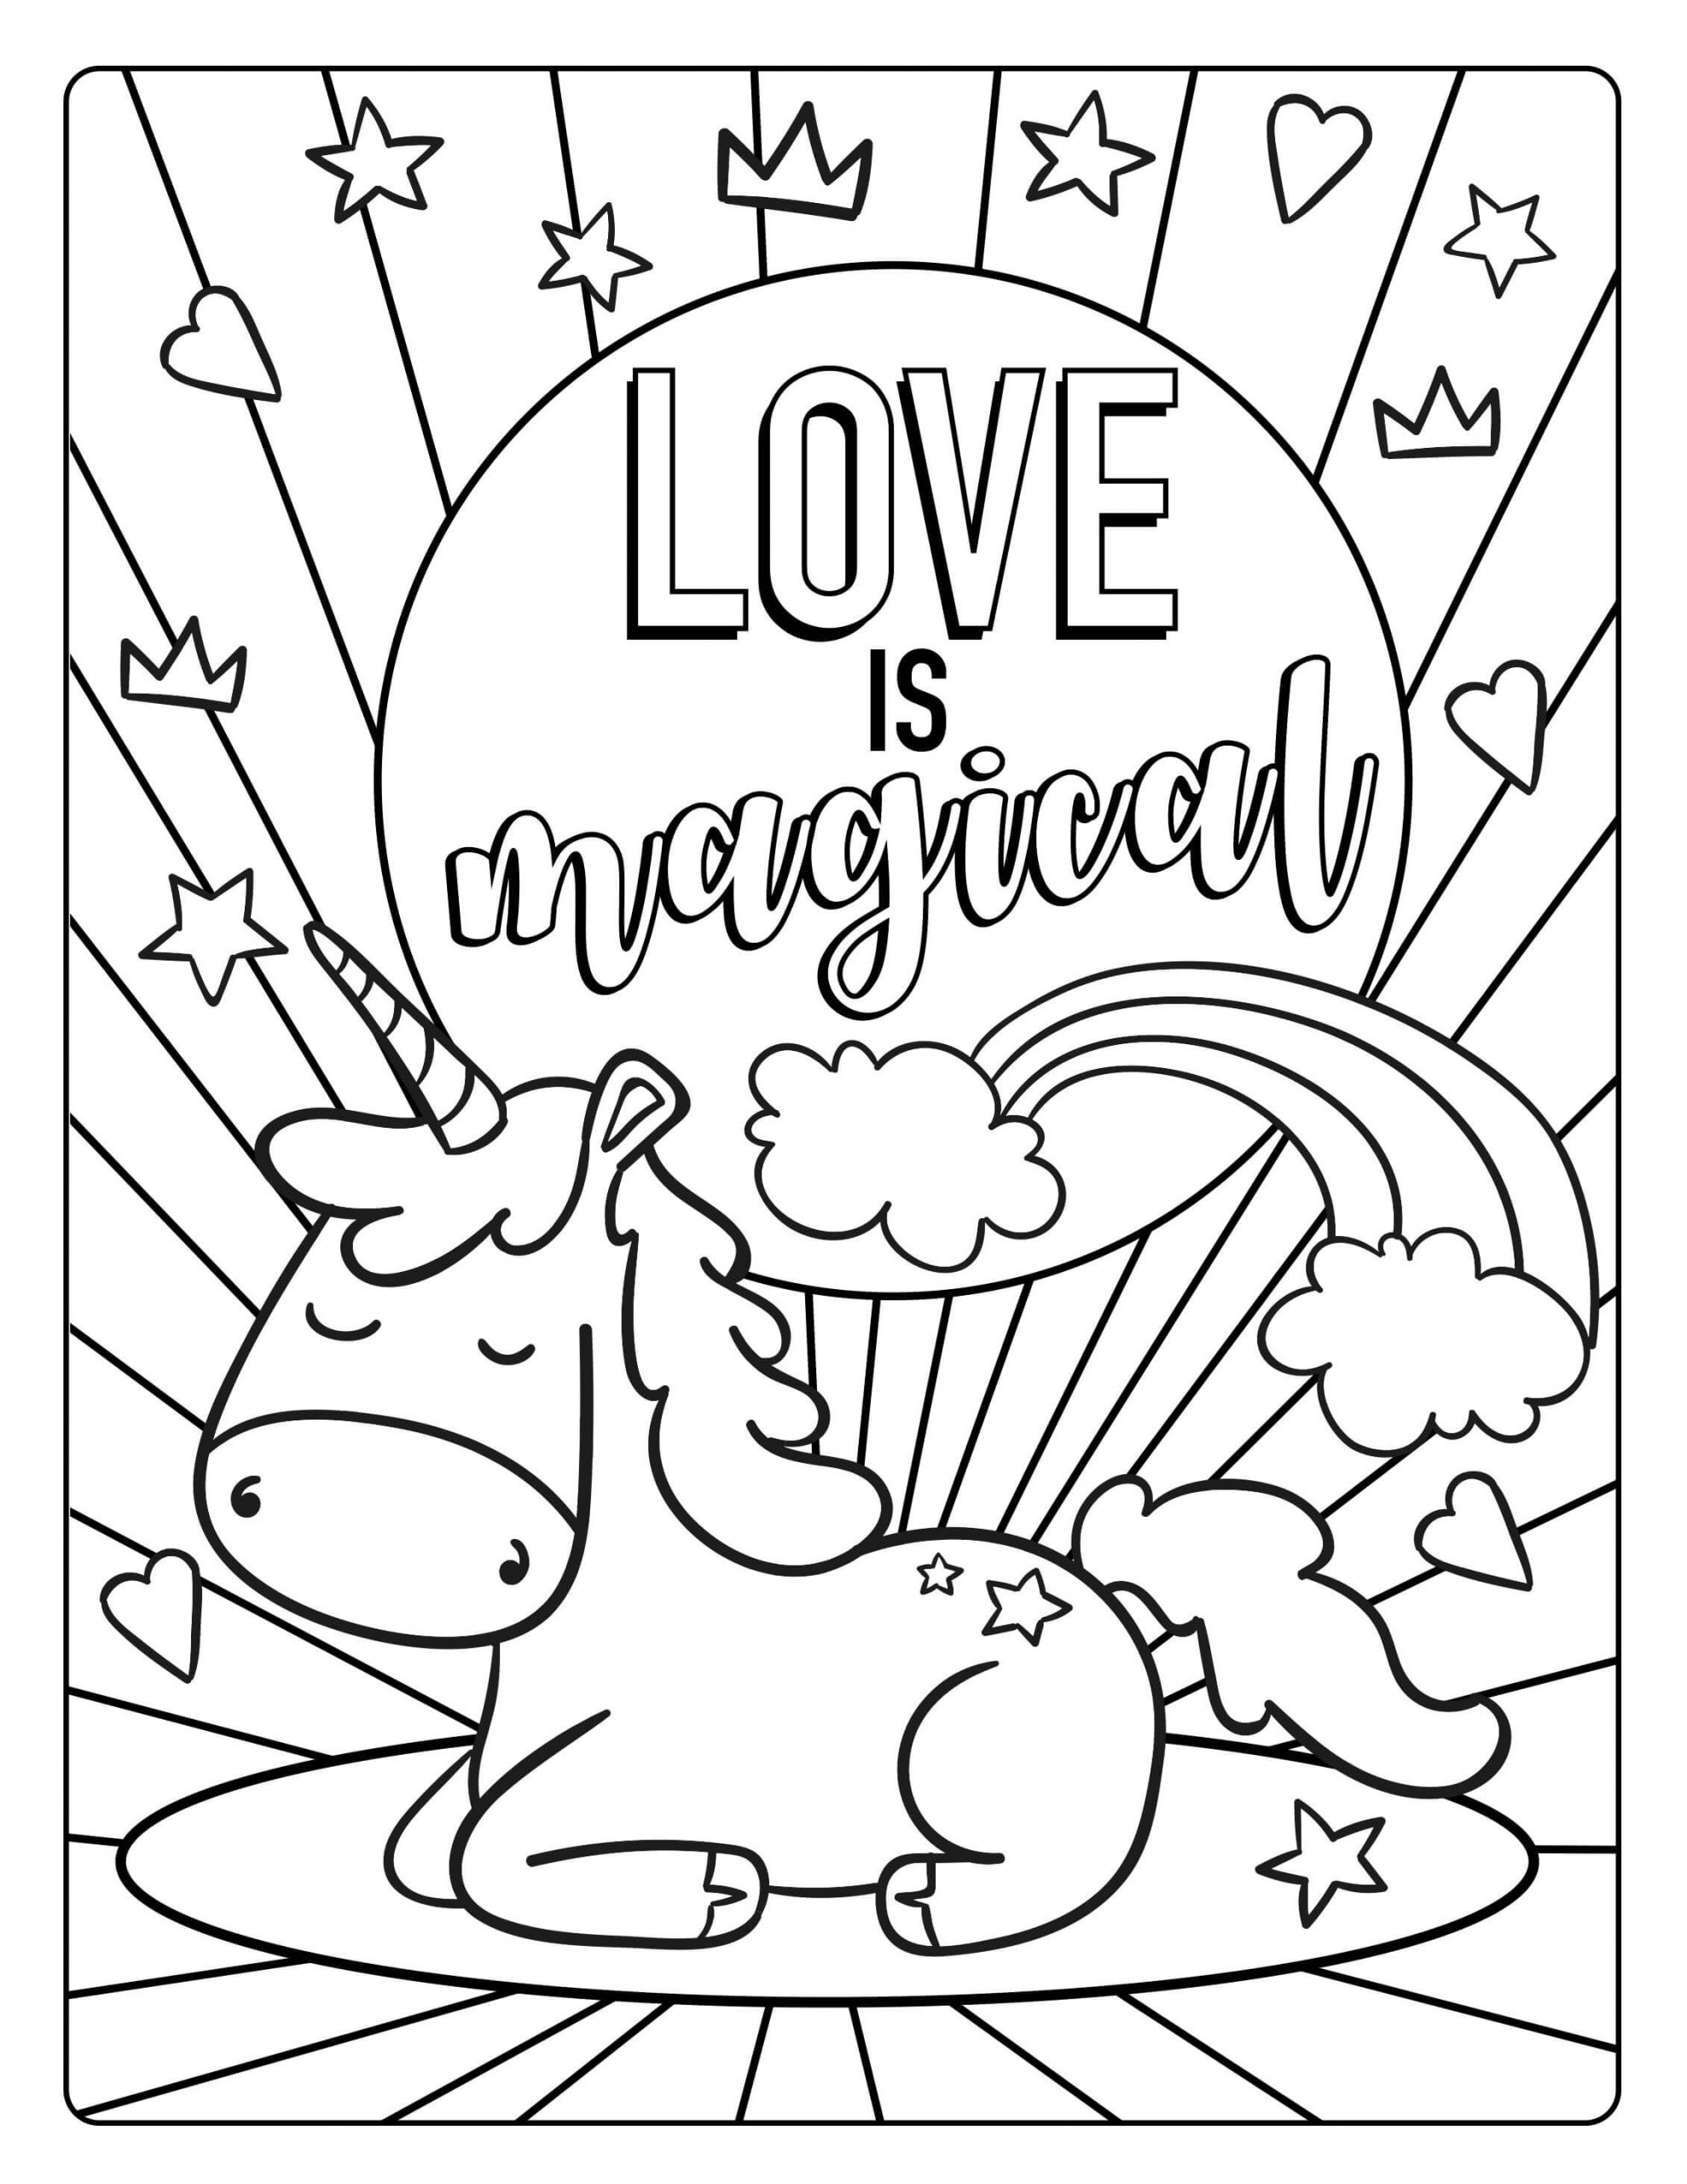 Love is Magical in Valentine coloring page